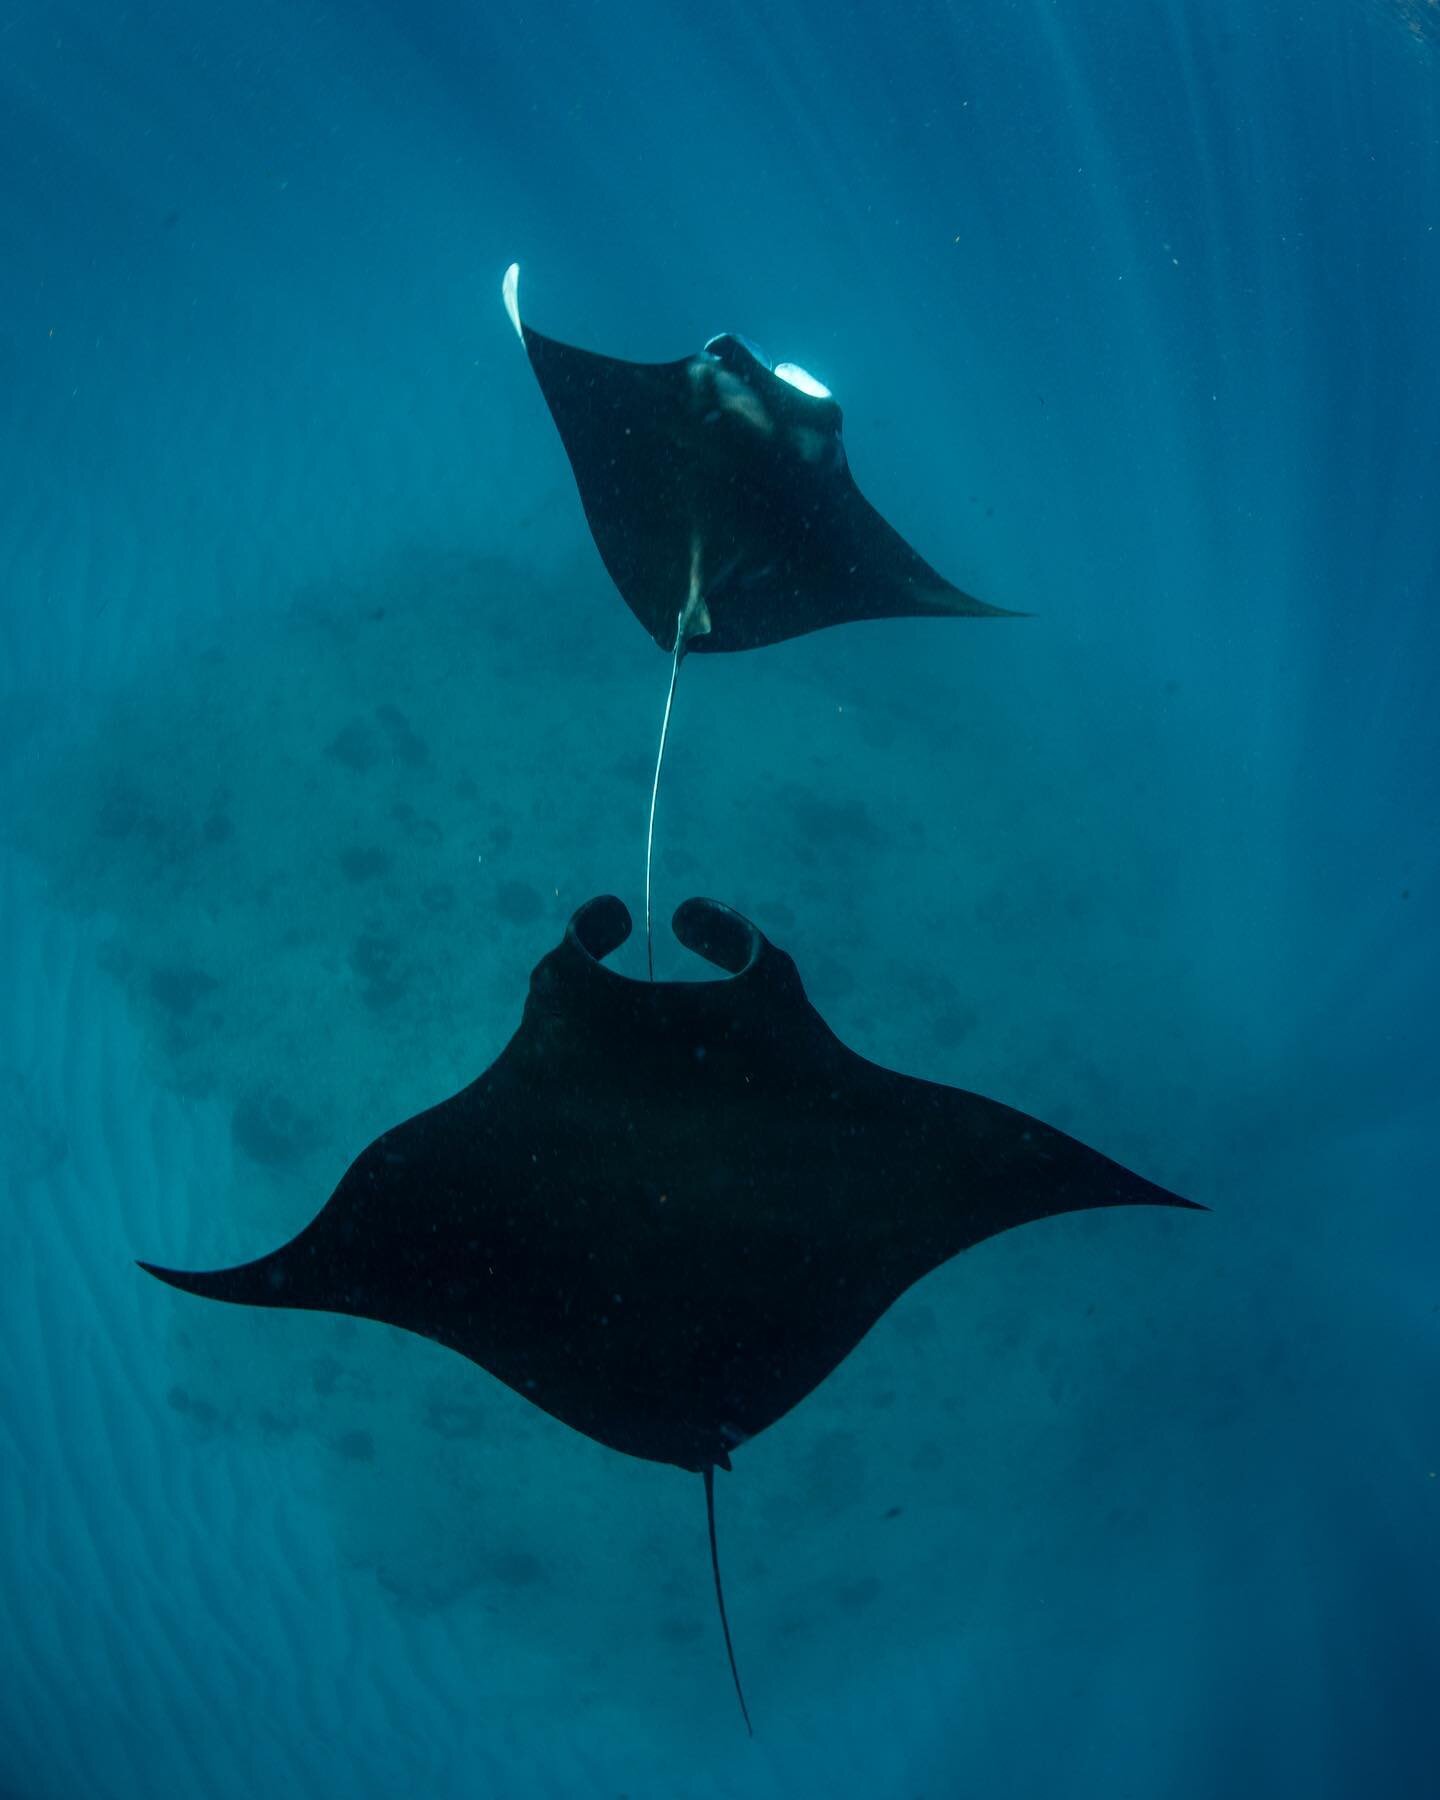 First day on the Ningaloo Reef and I was completely blown away by the action on the reef.
We swam with about 6 mantas for a couple hours as they fed on the plankton and slaps in the water.

#ningaloo #australiareefs #manta #mantaray #reefmanta #coral